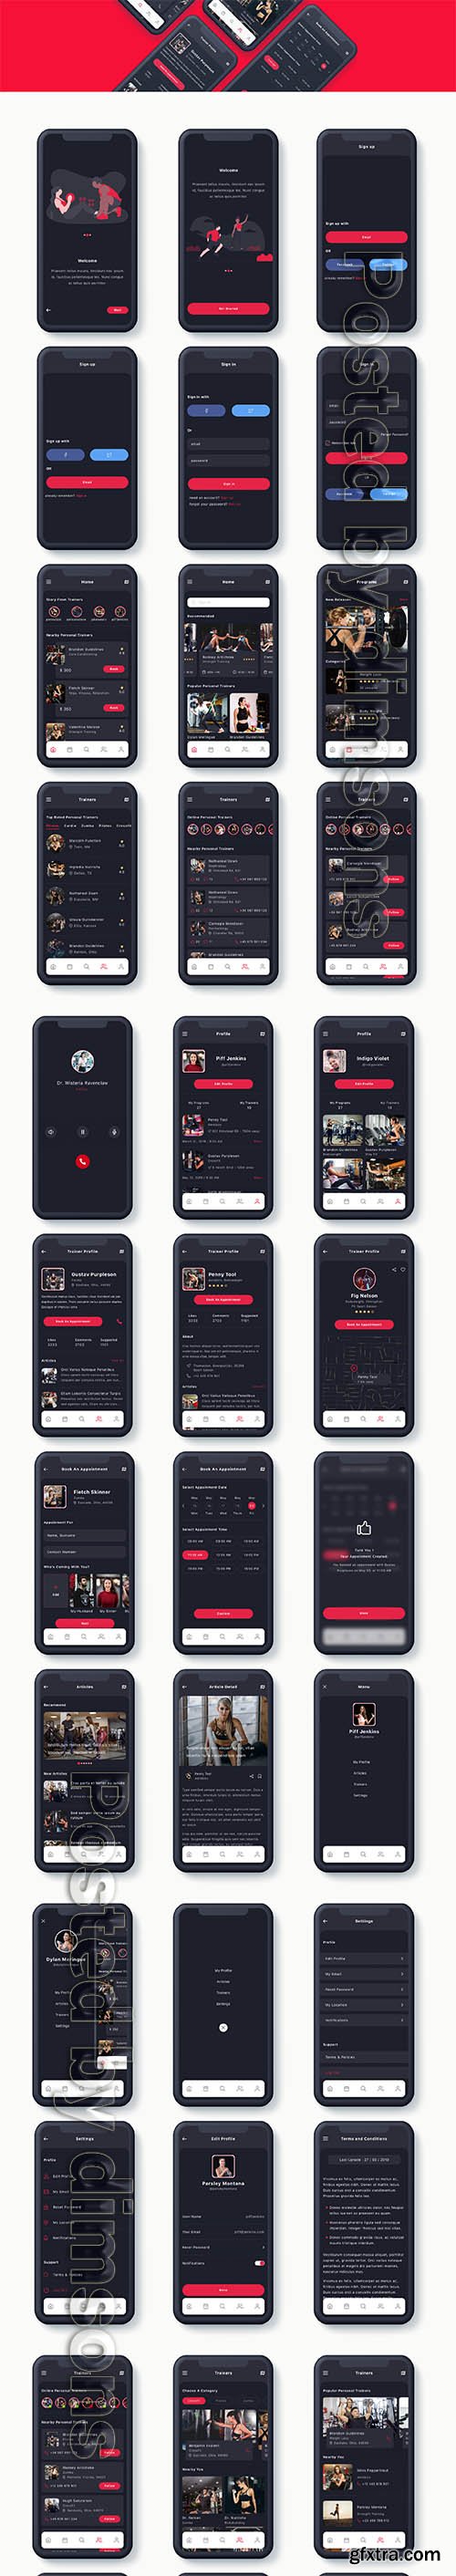 Badi - Find a Personal Trainers App UI Kit